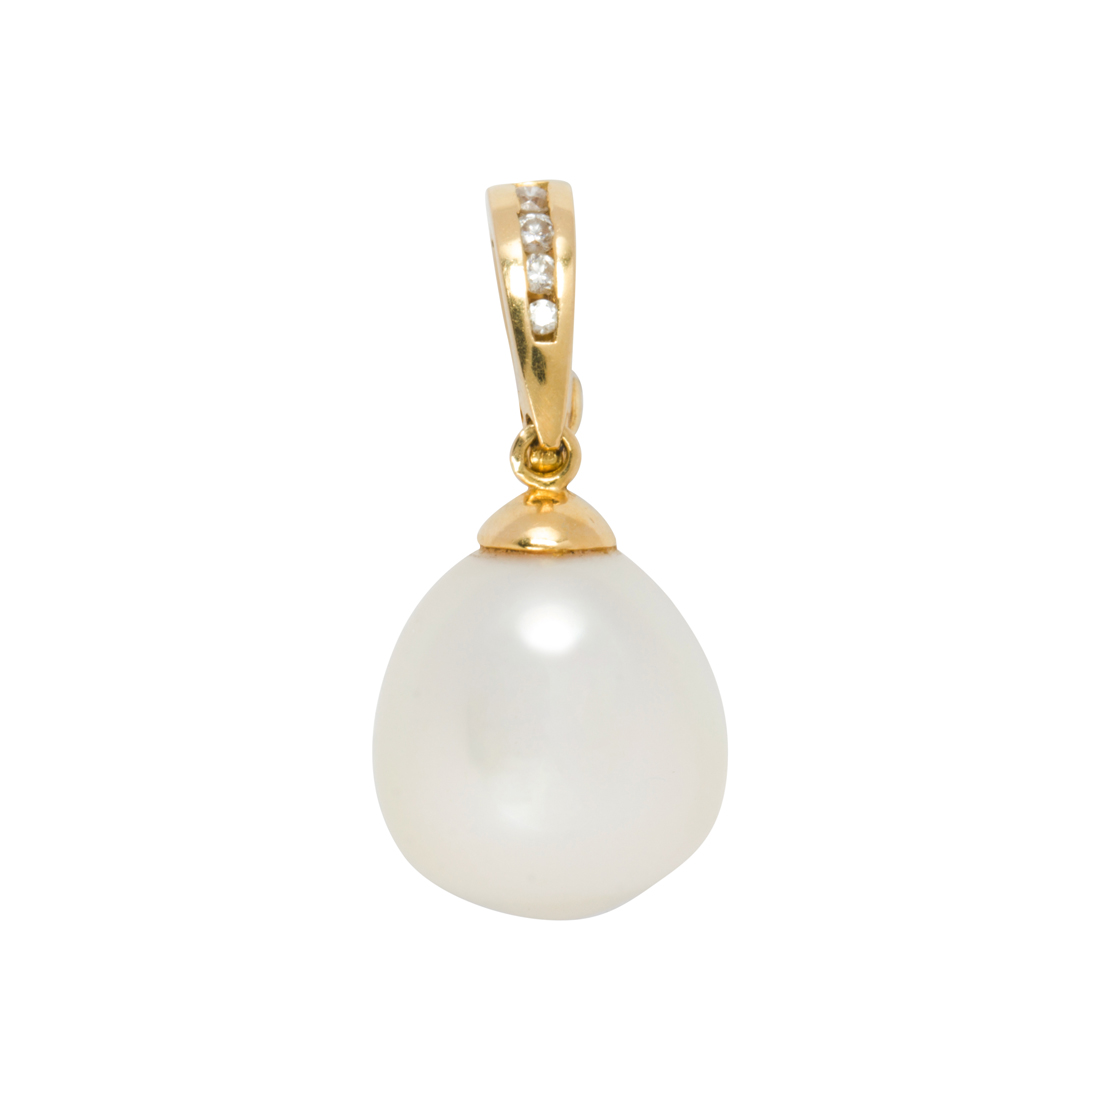 A CULTURED PEARL, DIAMOND AND 18K